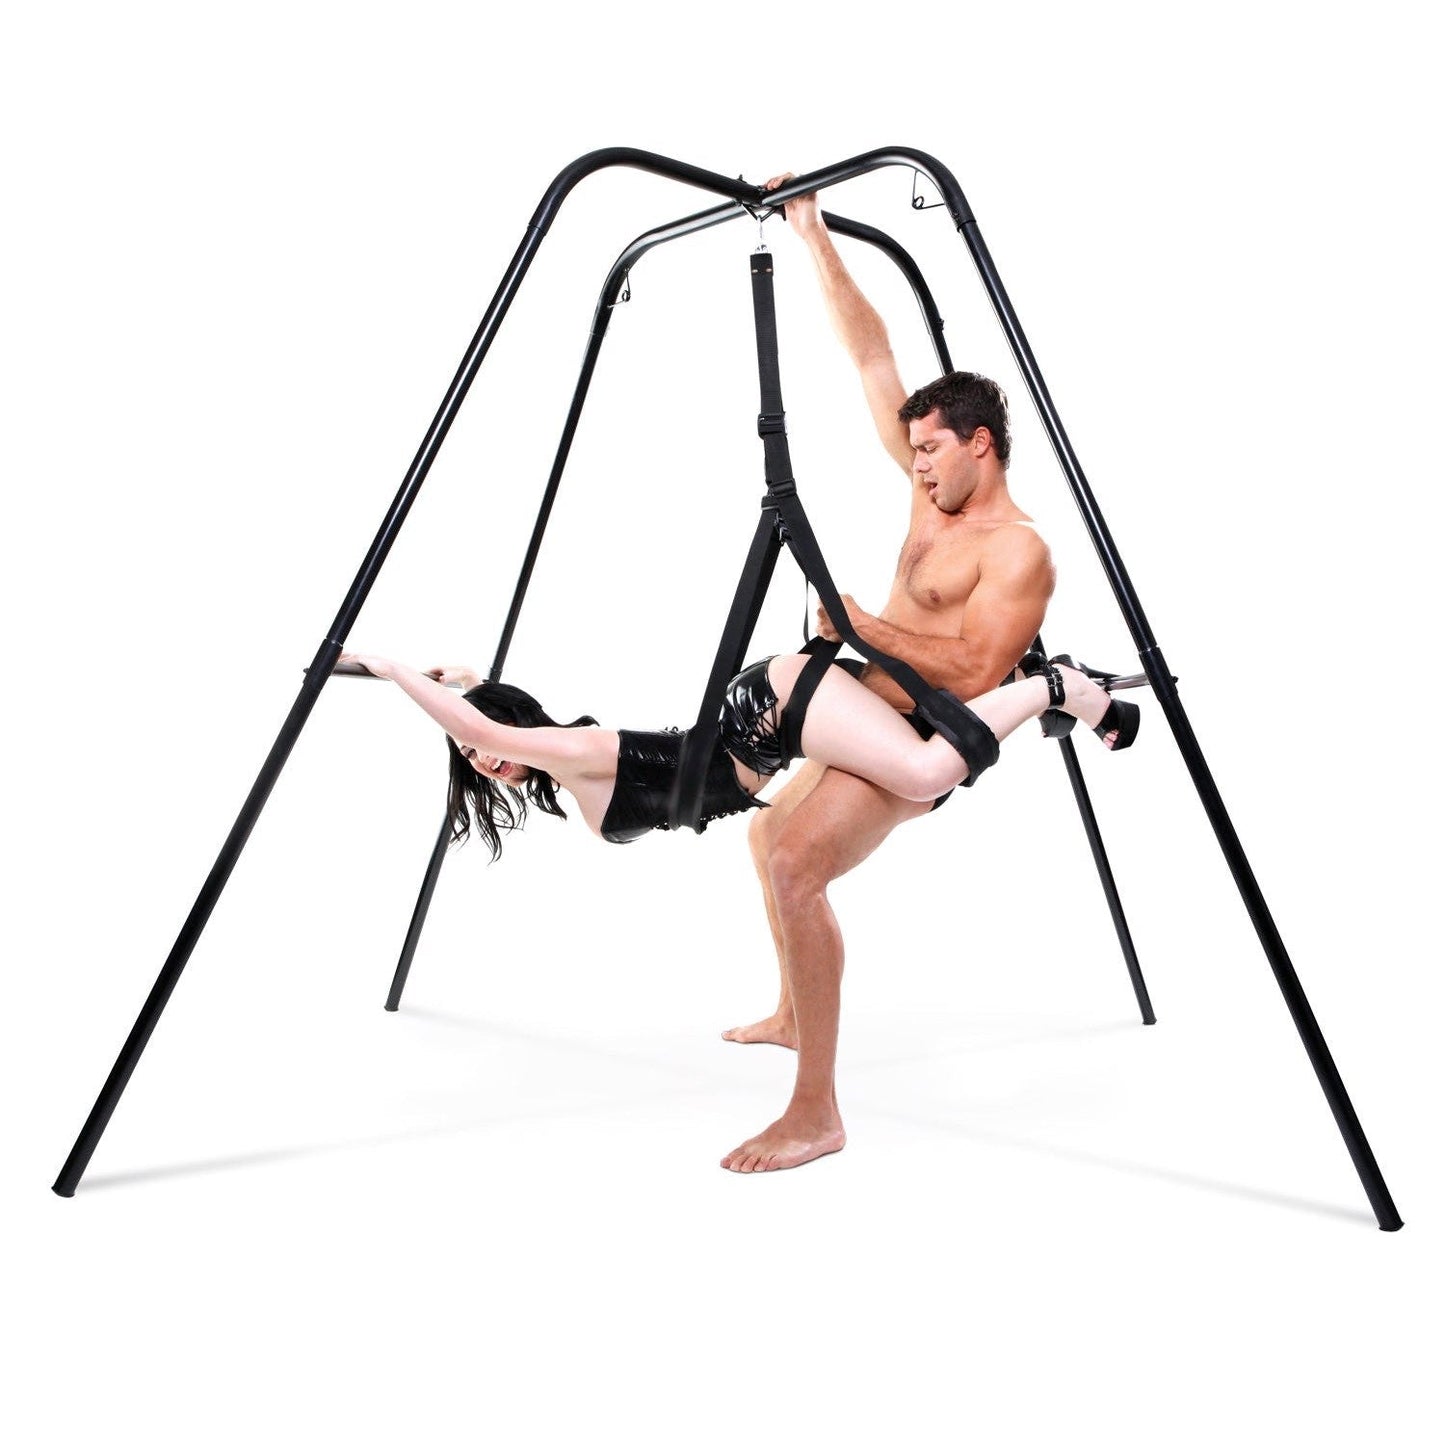 Fantasy Swing Stand - Black Swing Stand (No Swing Included)